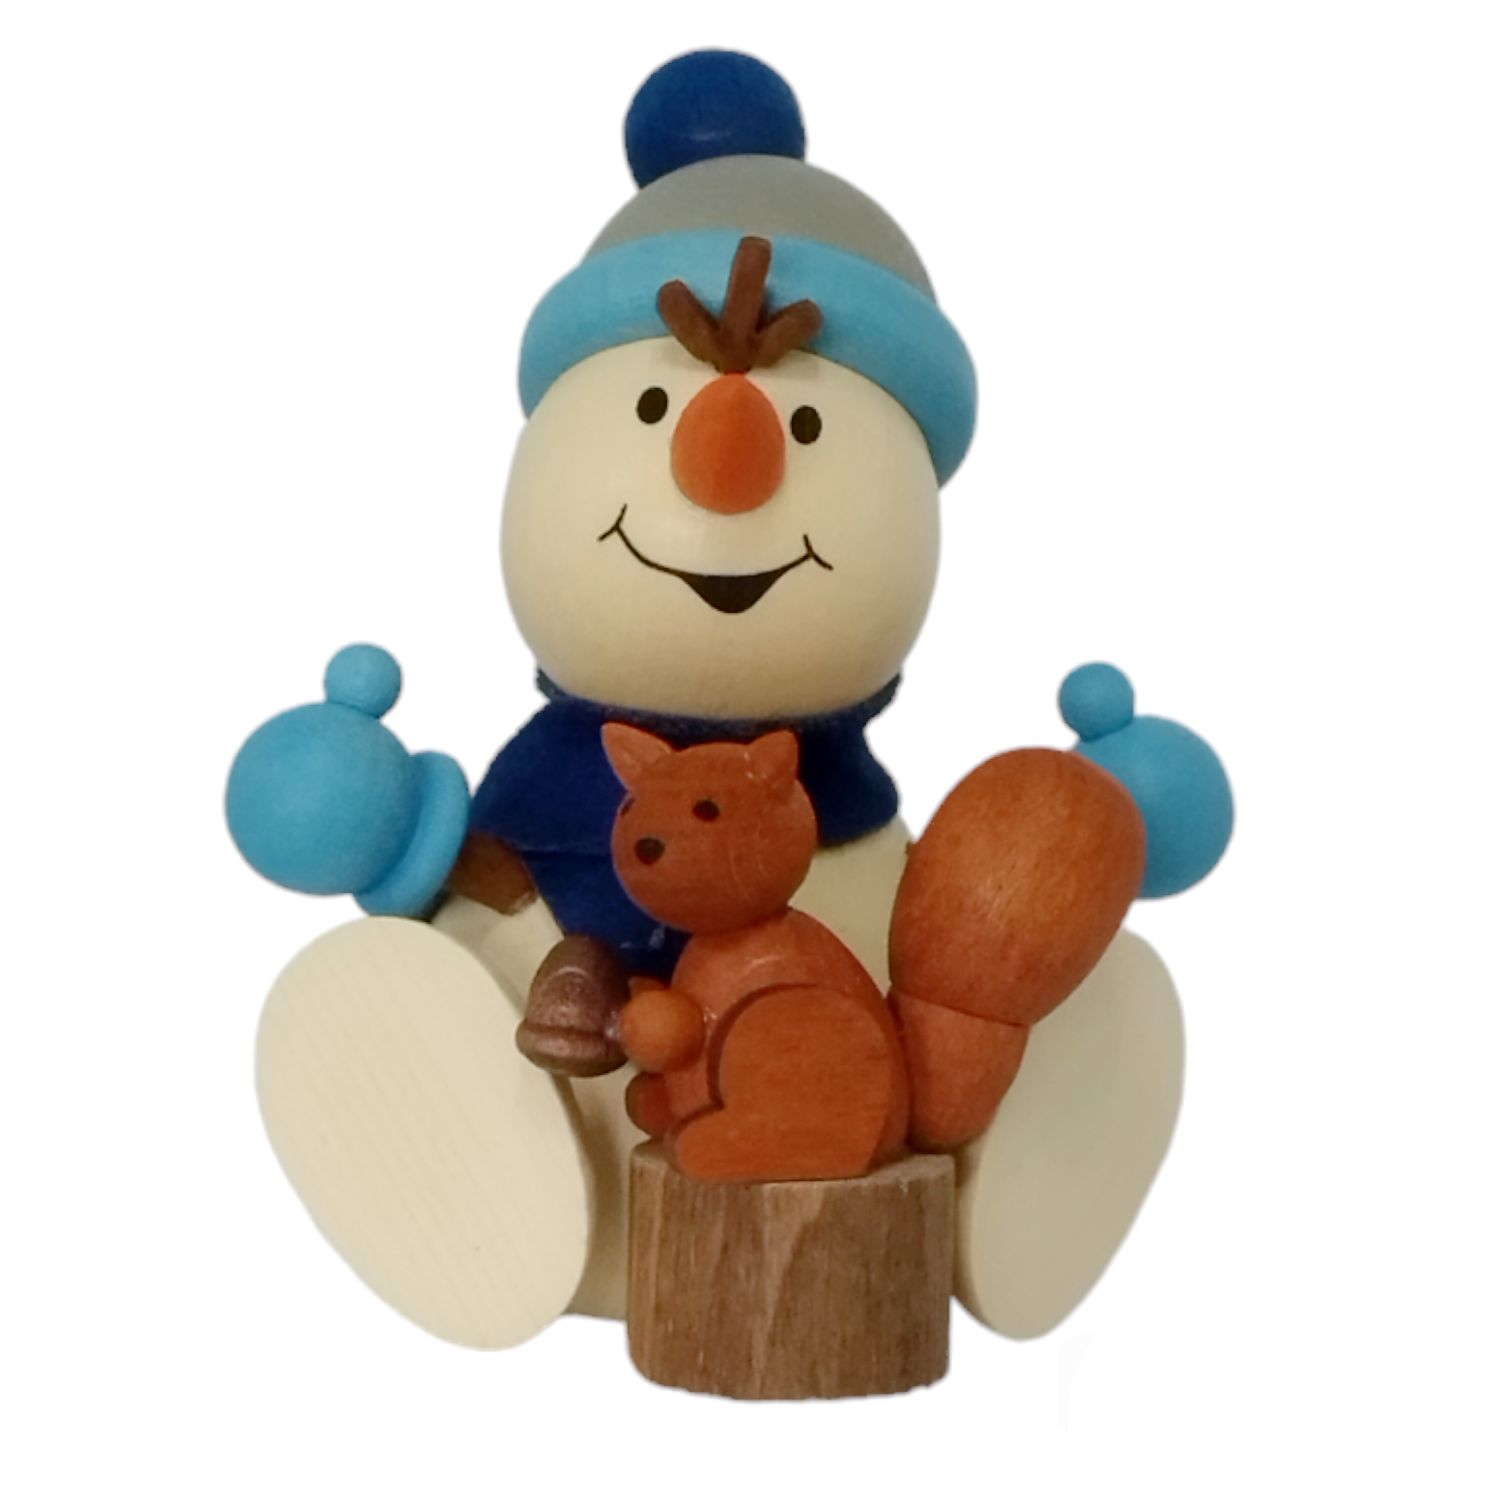 Snowman with squirrel